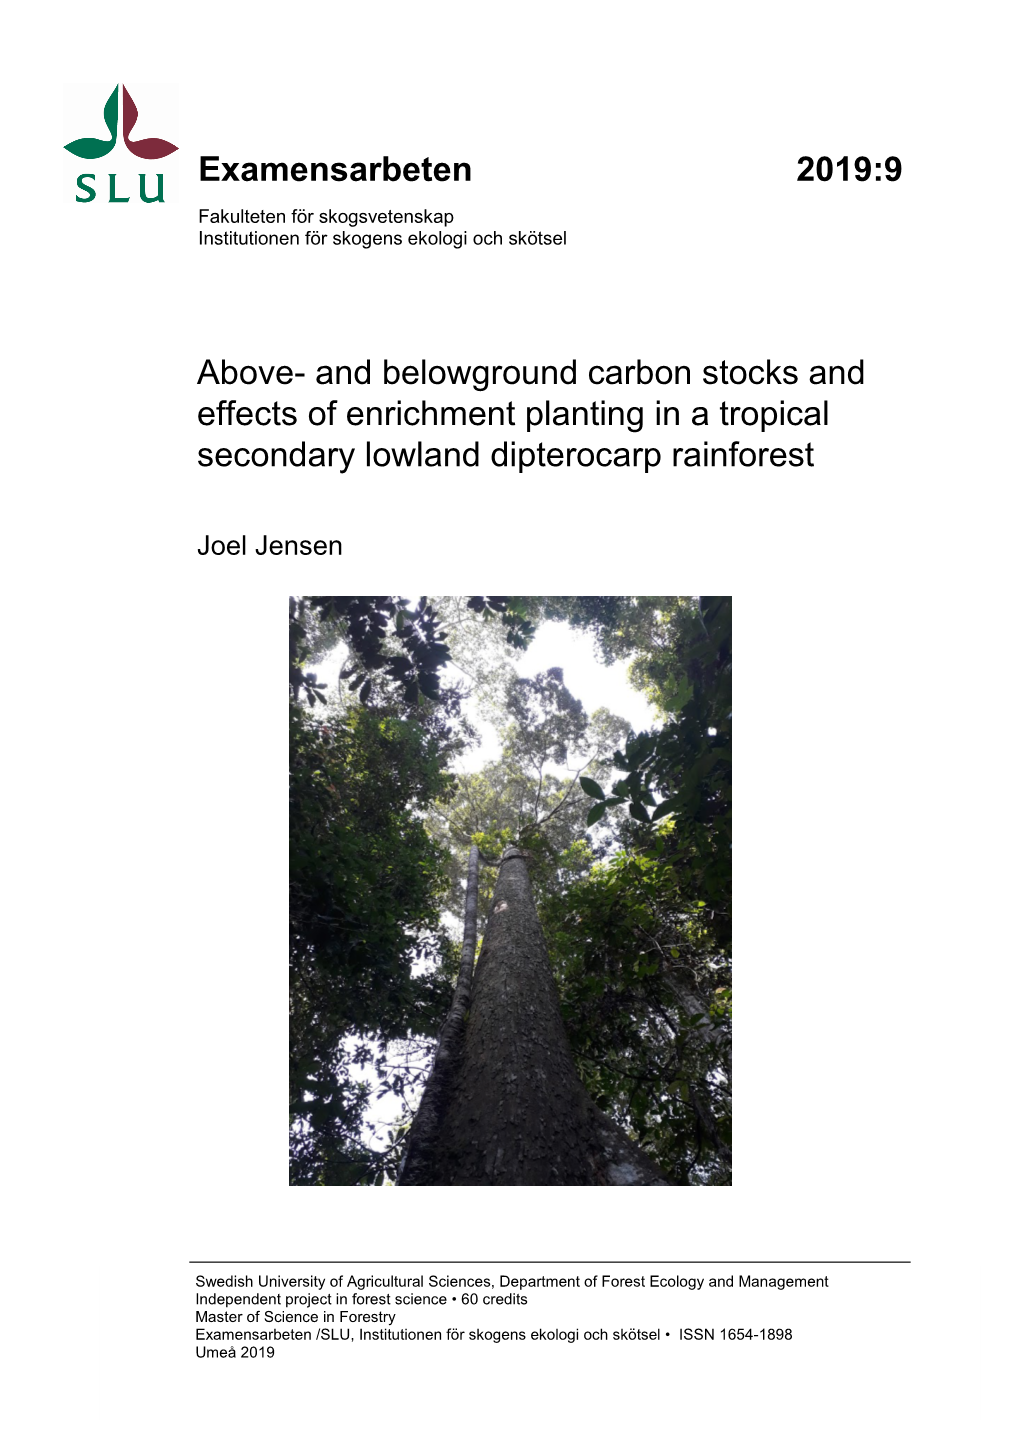 And Belowground Carbon Stocks and Effects of Enrichment Planting in a Tropical Secondary Lowland Dipterocarp Rainforest